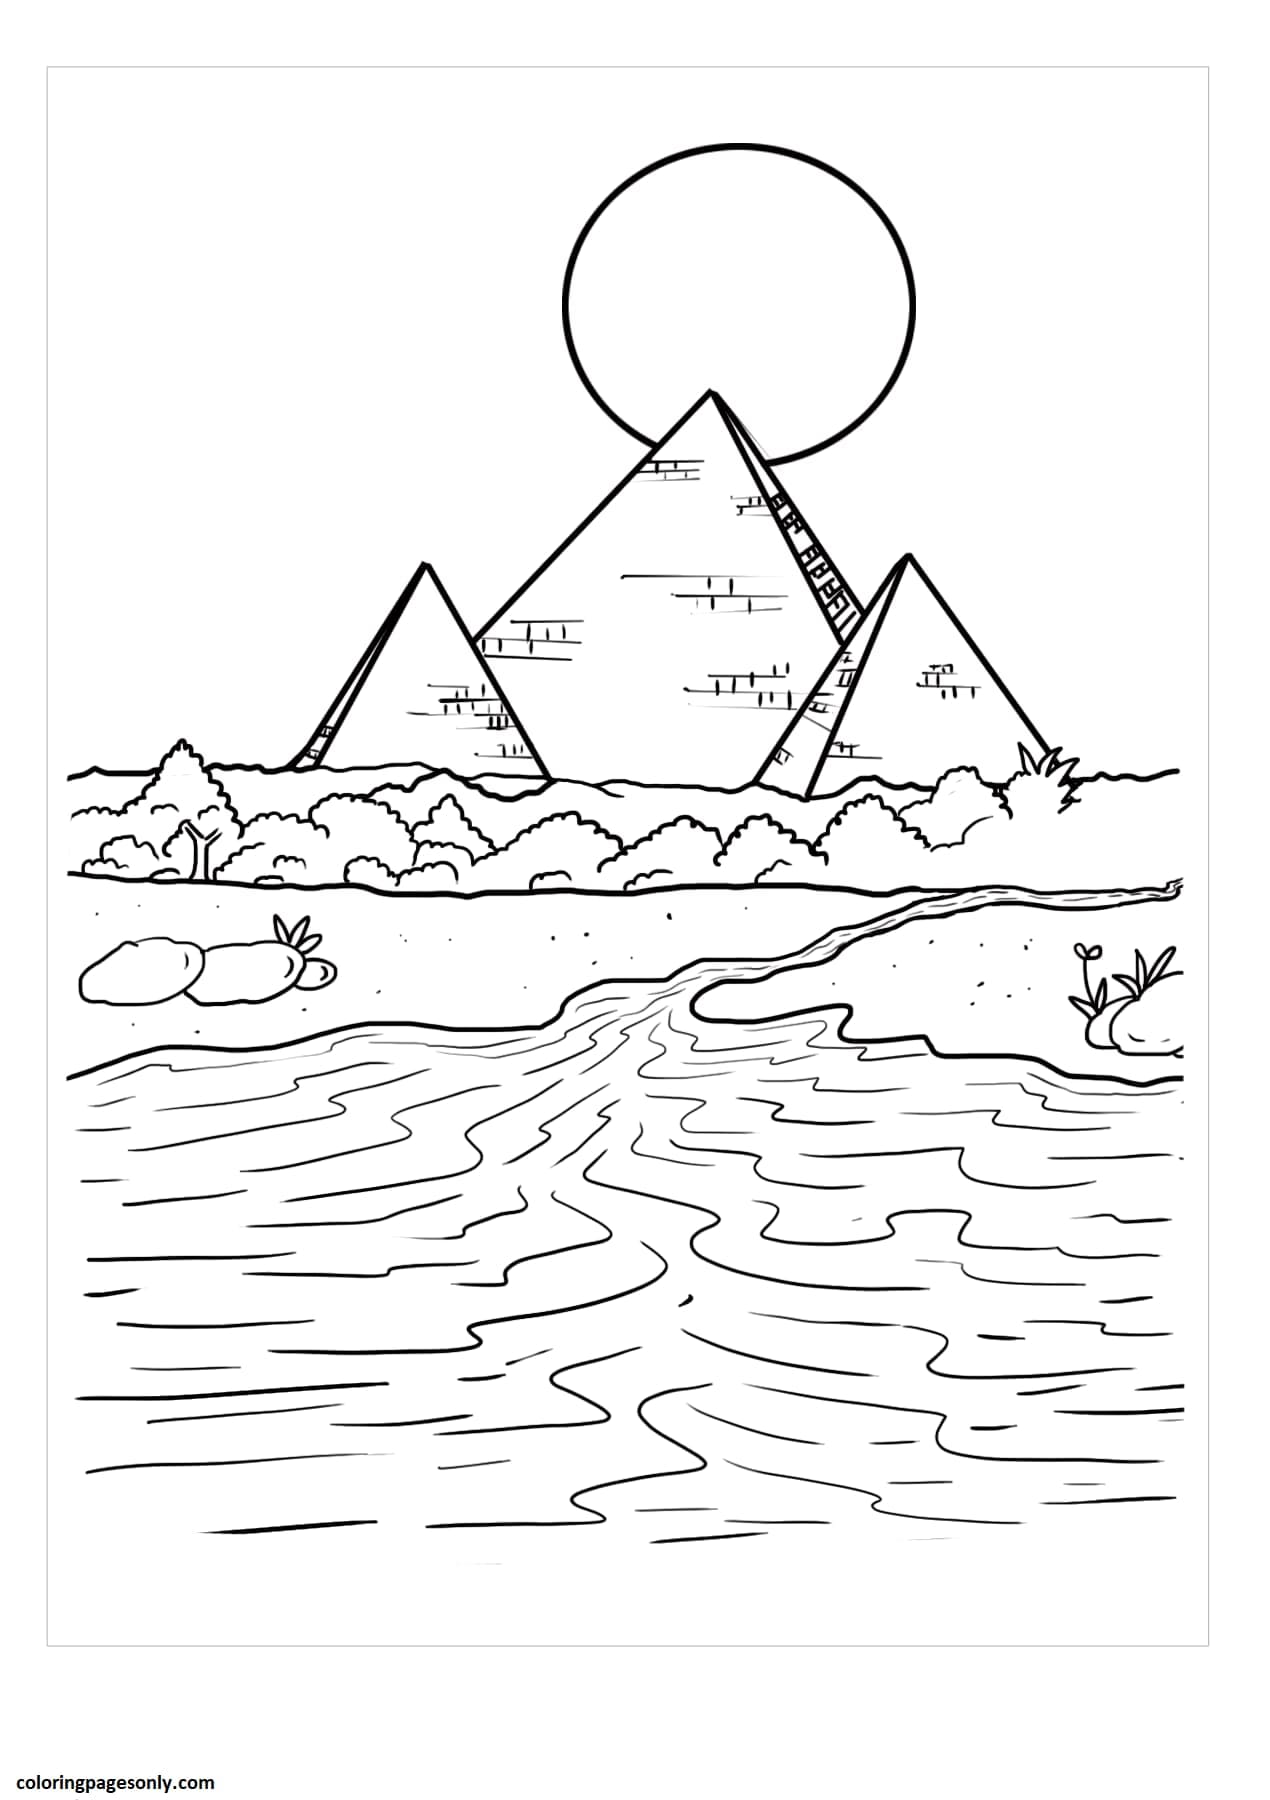 Nile River Coloring Page